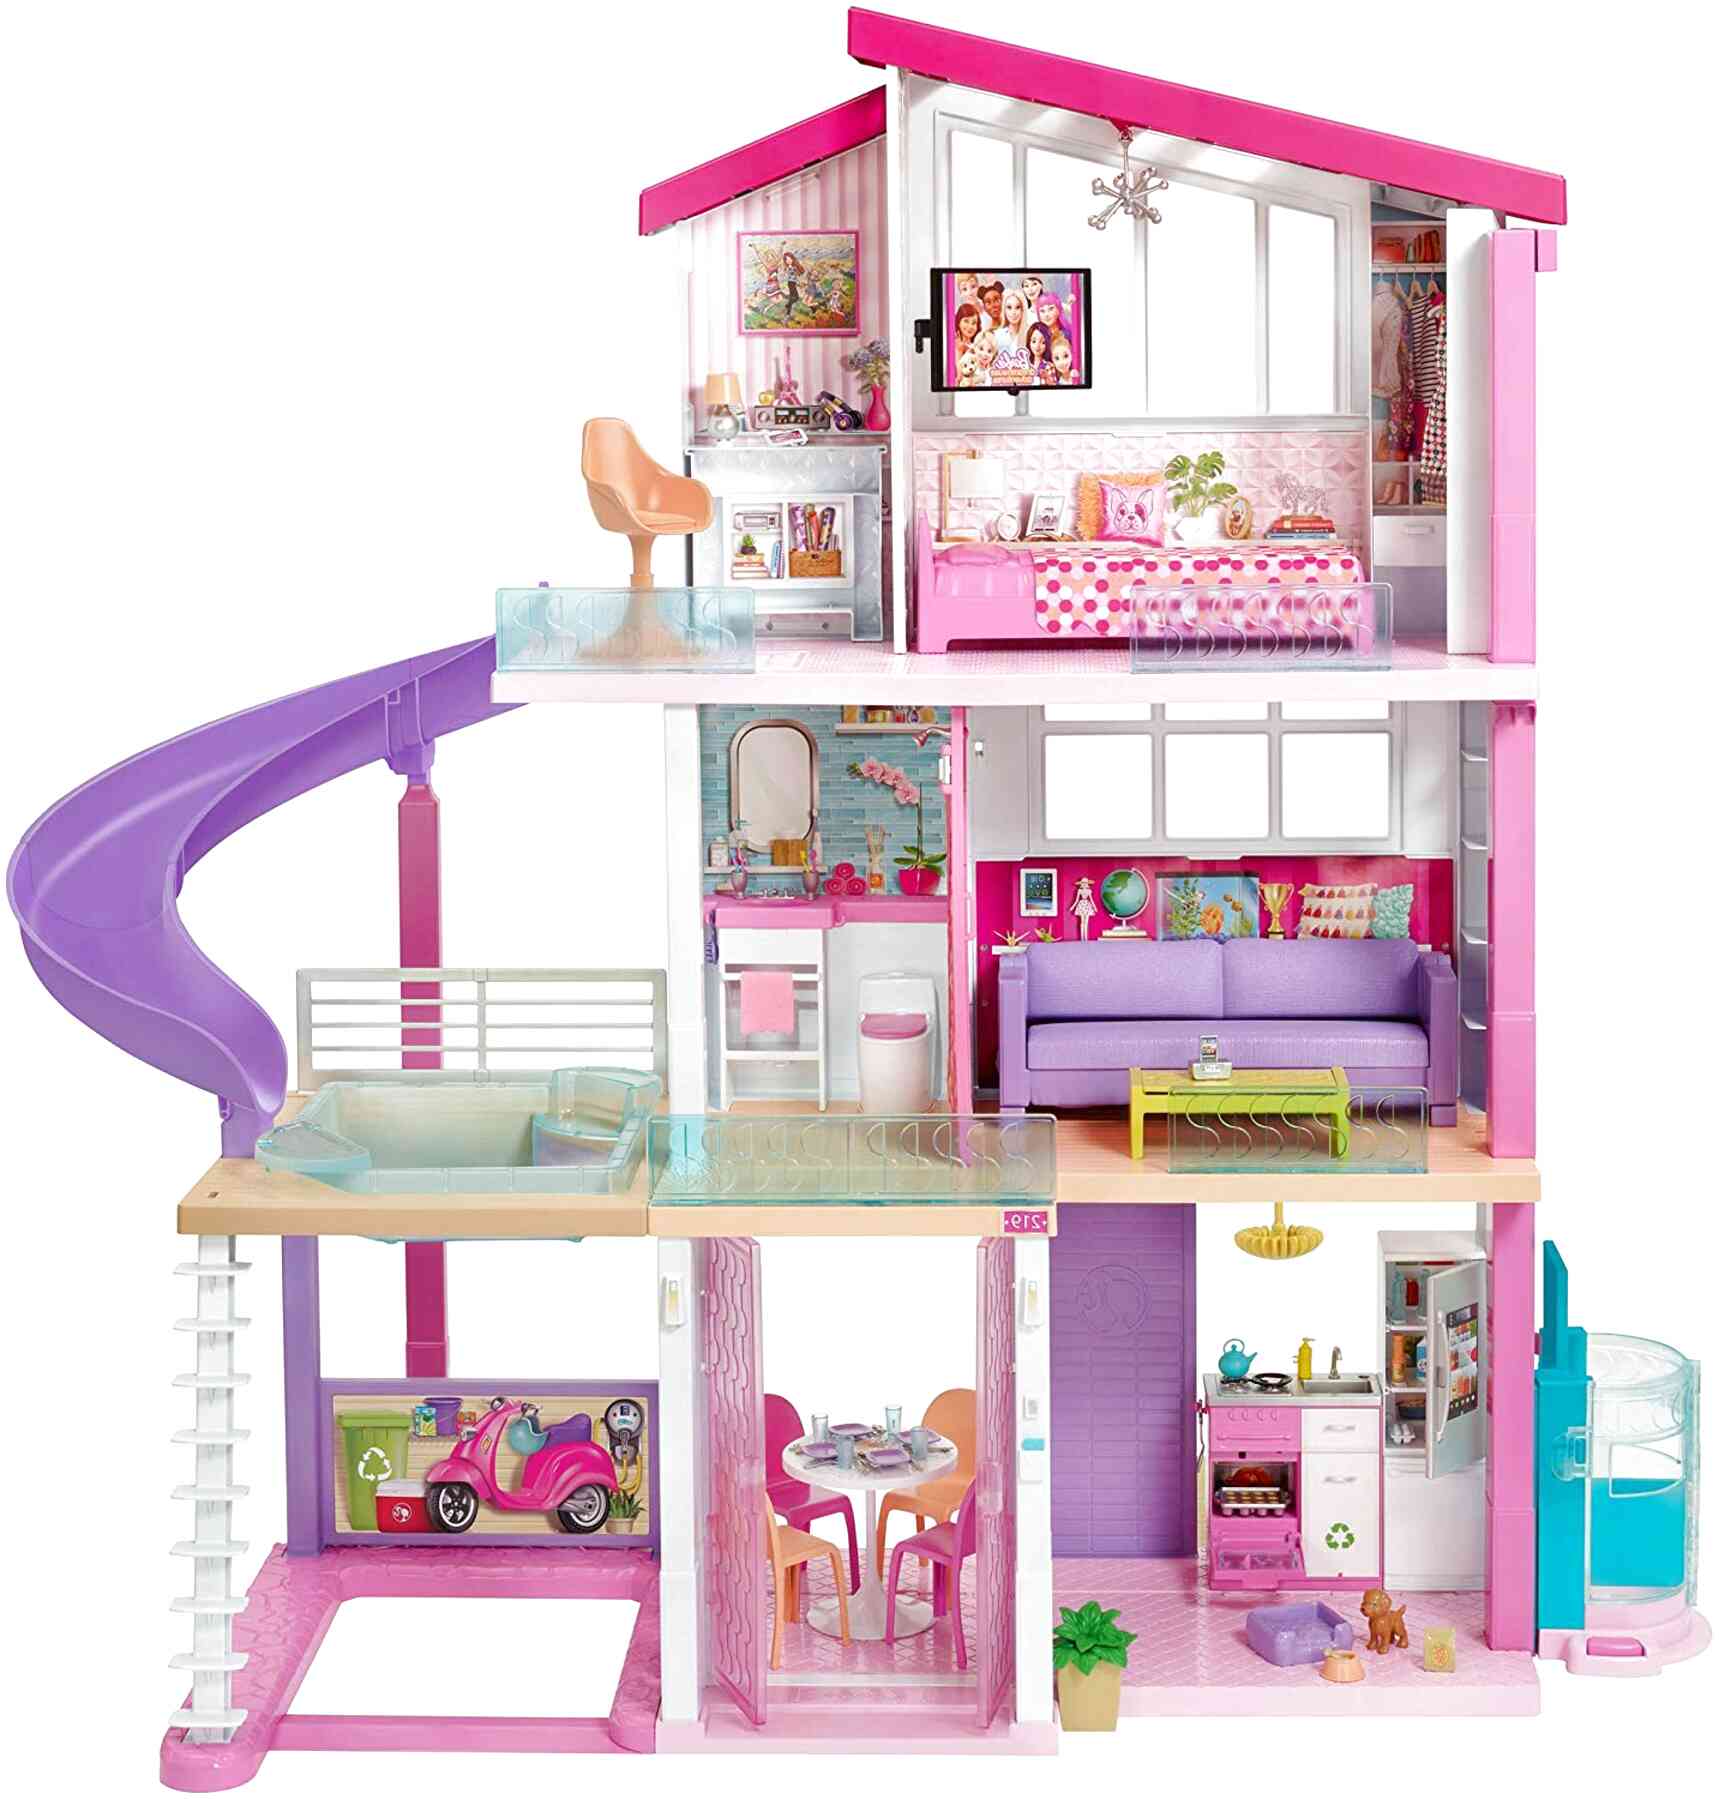 Barbie Dream House Uk Sale Off 65 Online Shopping Site For Fashion Lifestyle